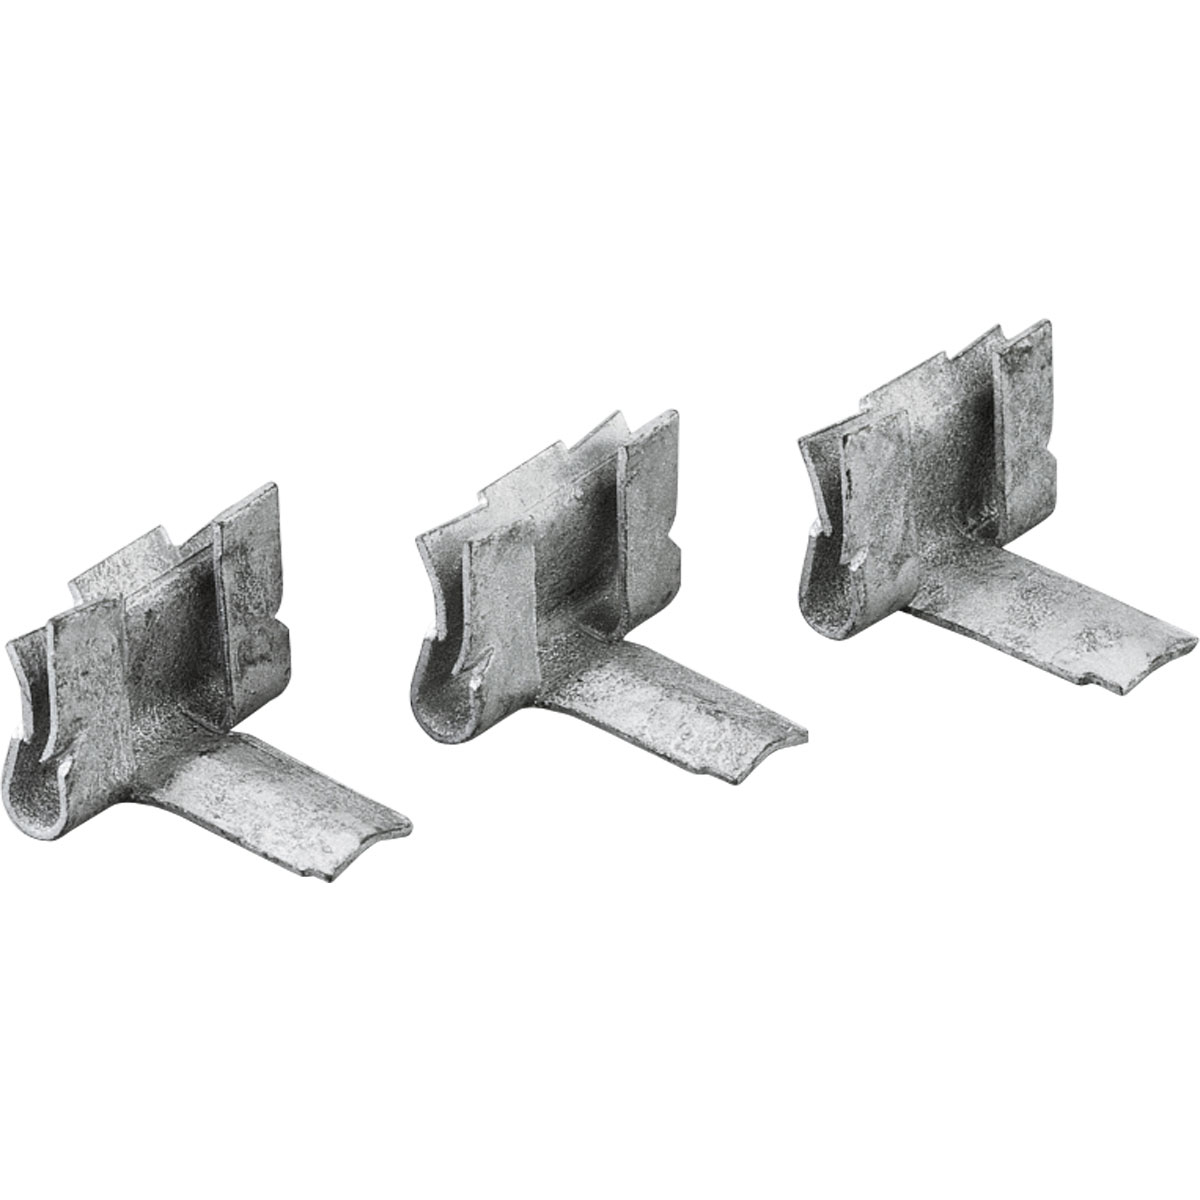 Three plaster frame clips for finished ceilings.